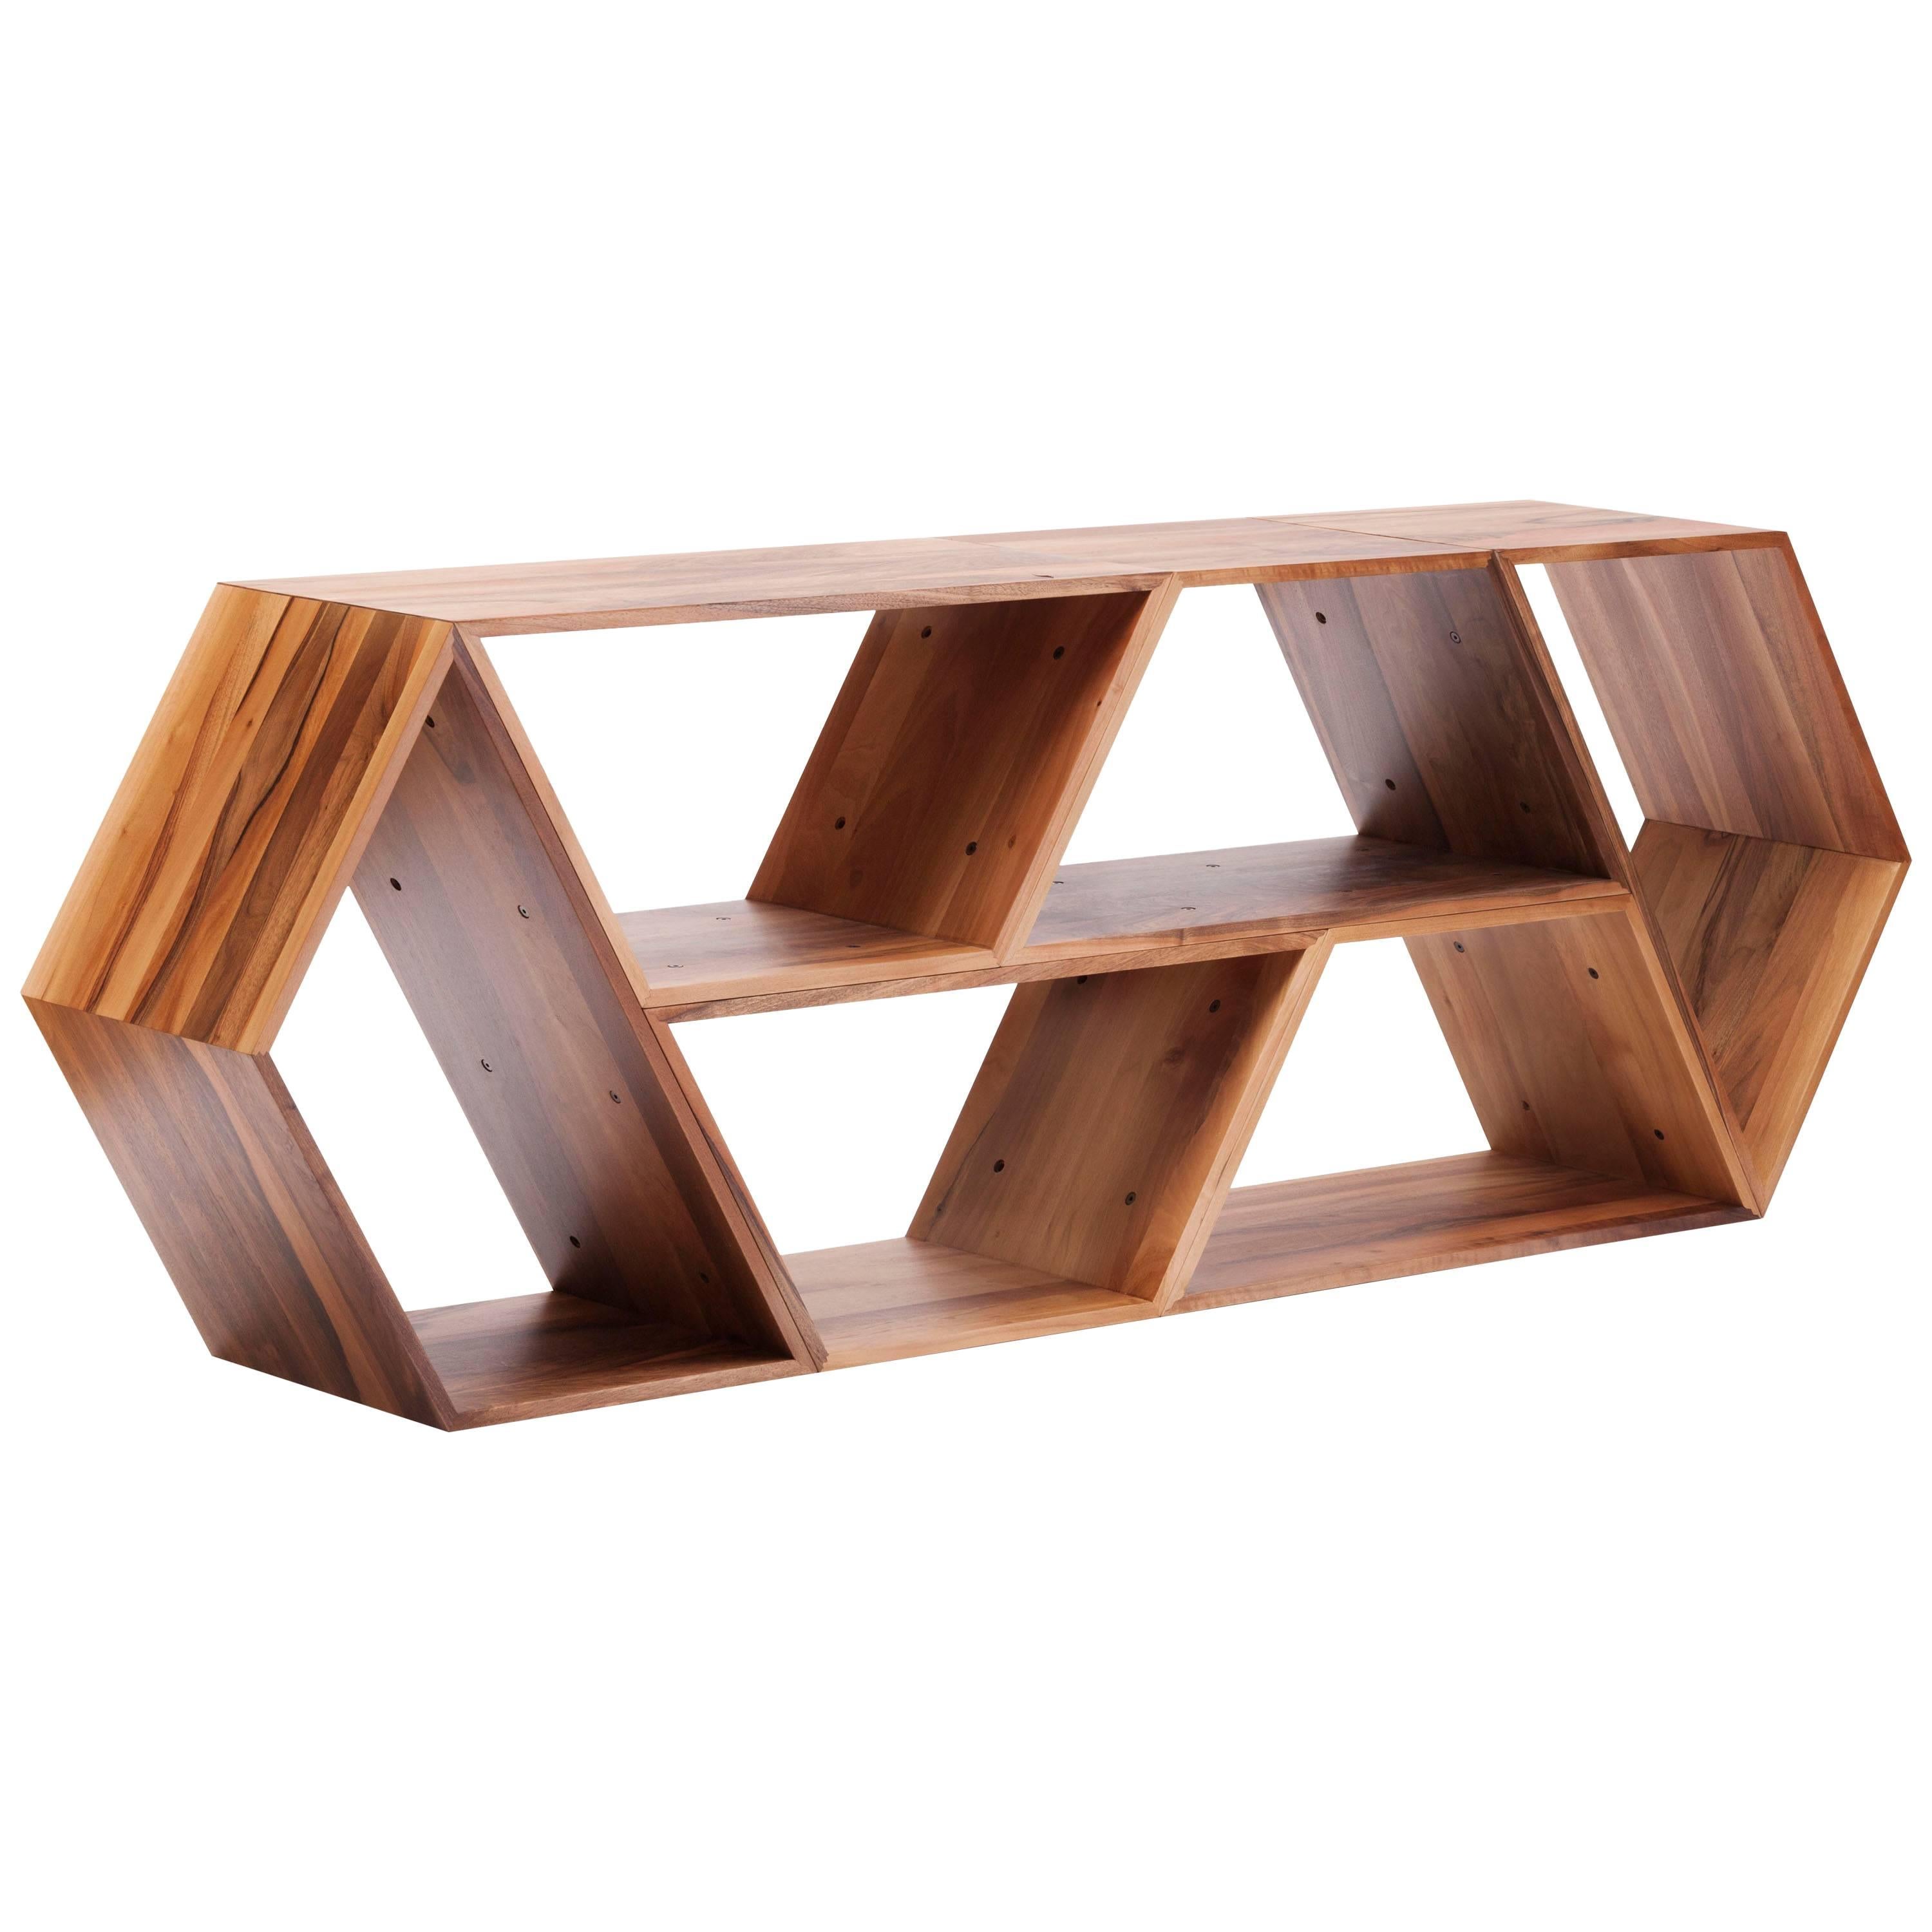 Tetra, Solid Walnut Contemporary Modular Shelving Units, Made in Ratio For Sale